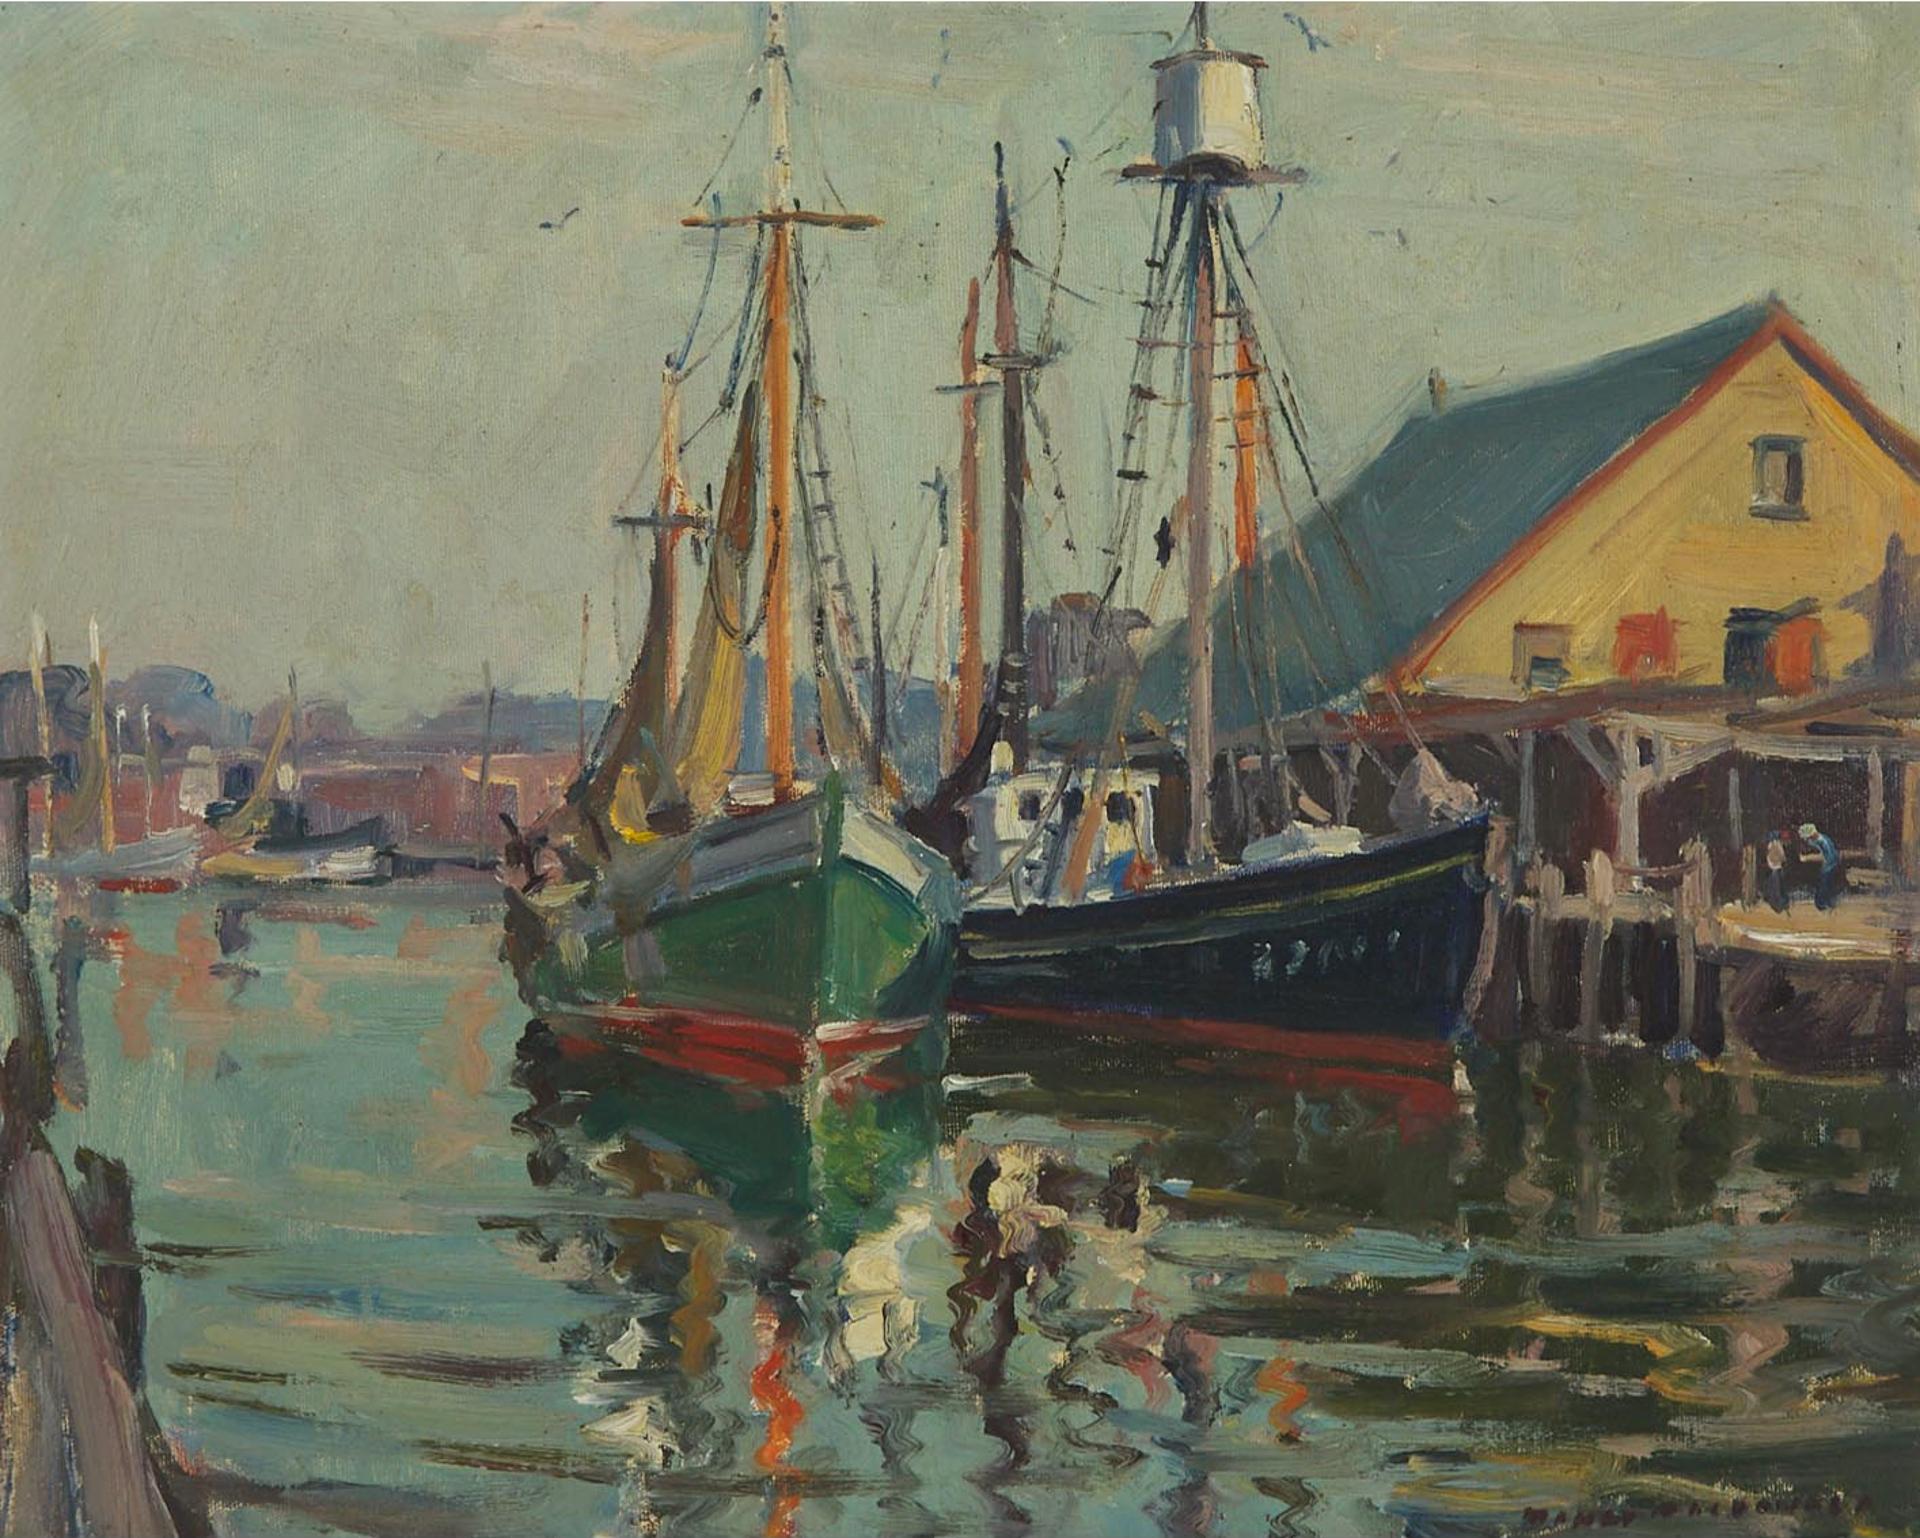 Manly Edward MacDonald (1889-1971) - In The Harbour